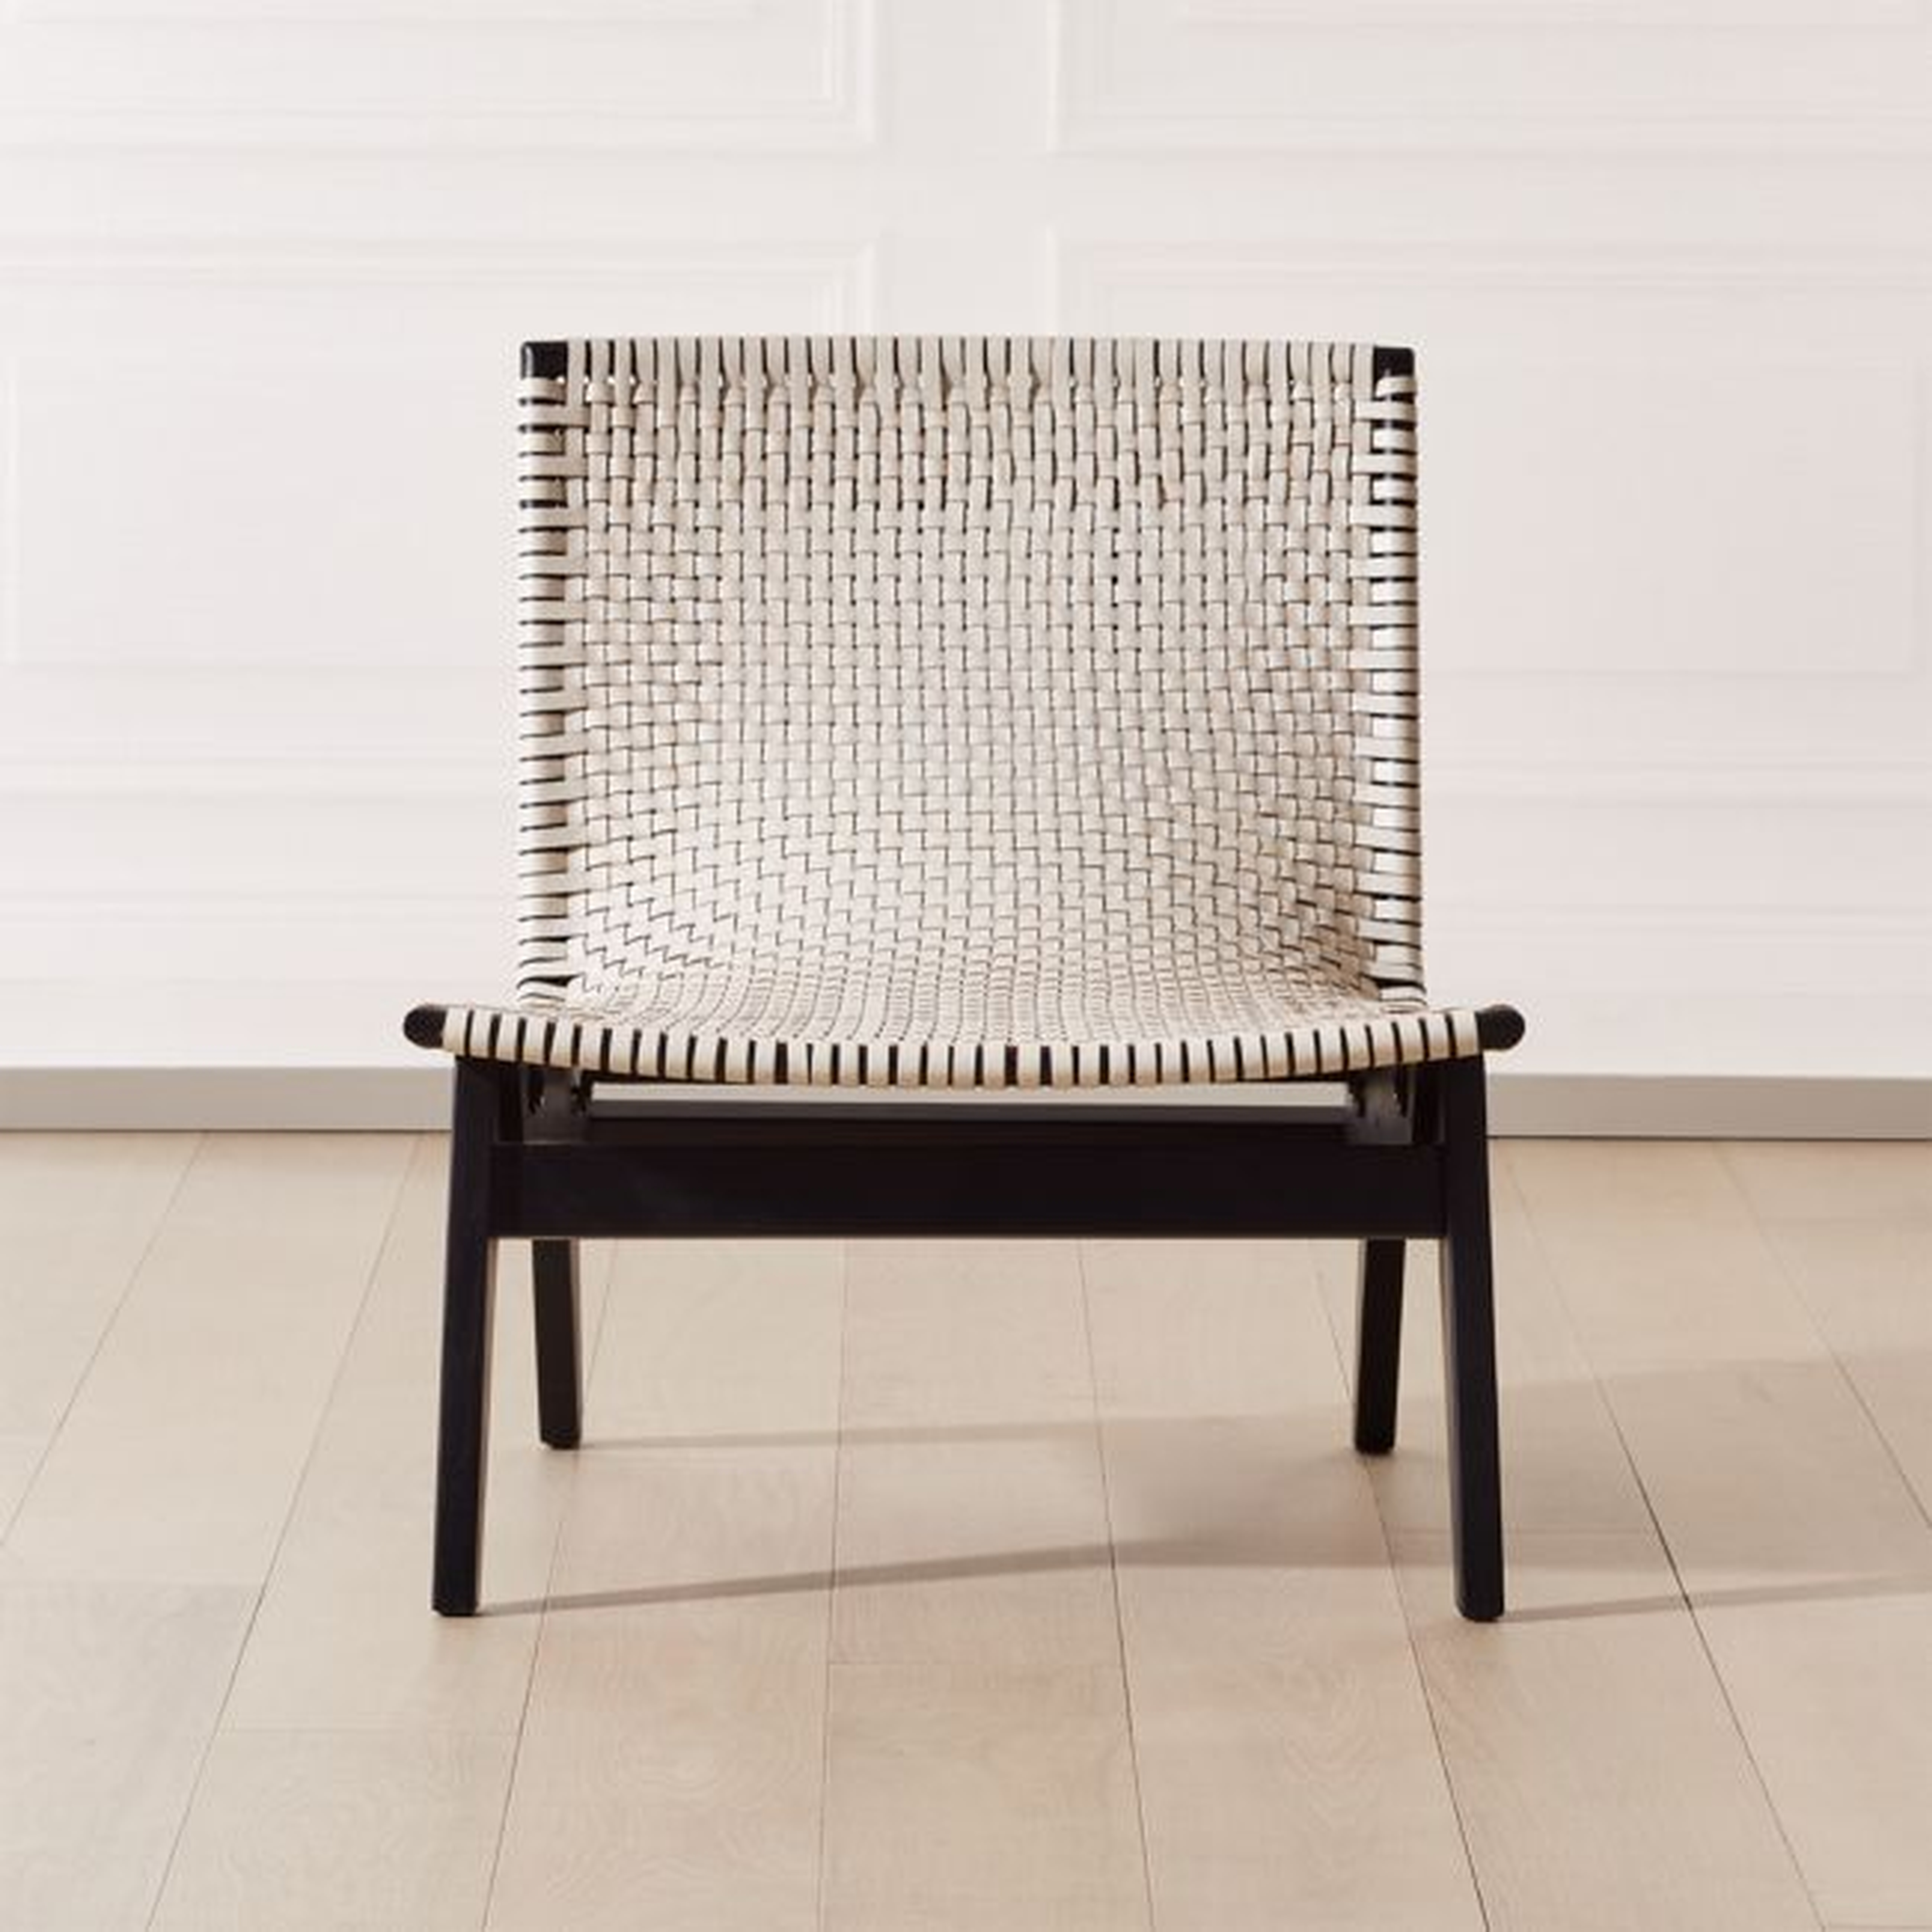 Morada Woven Ivory Leather Chair - CB2